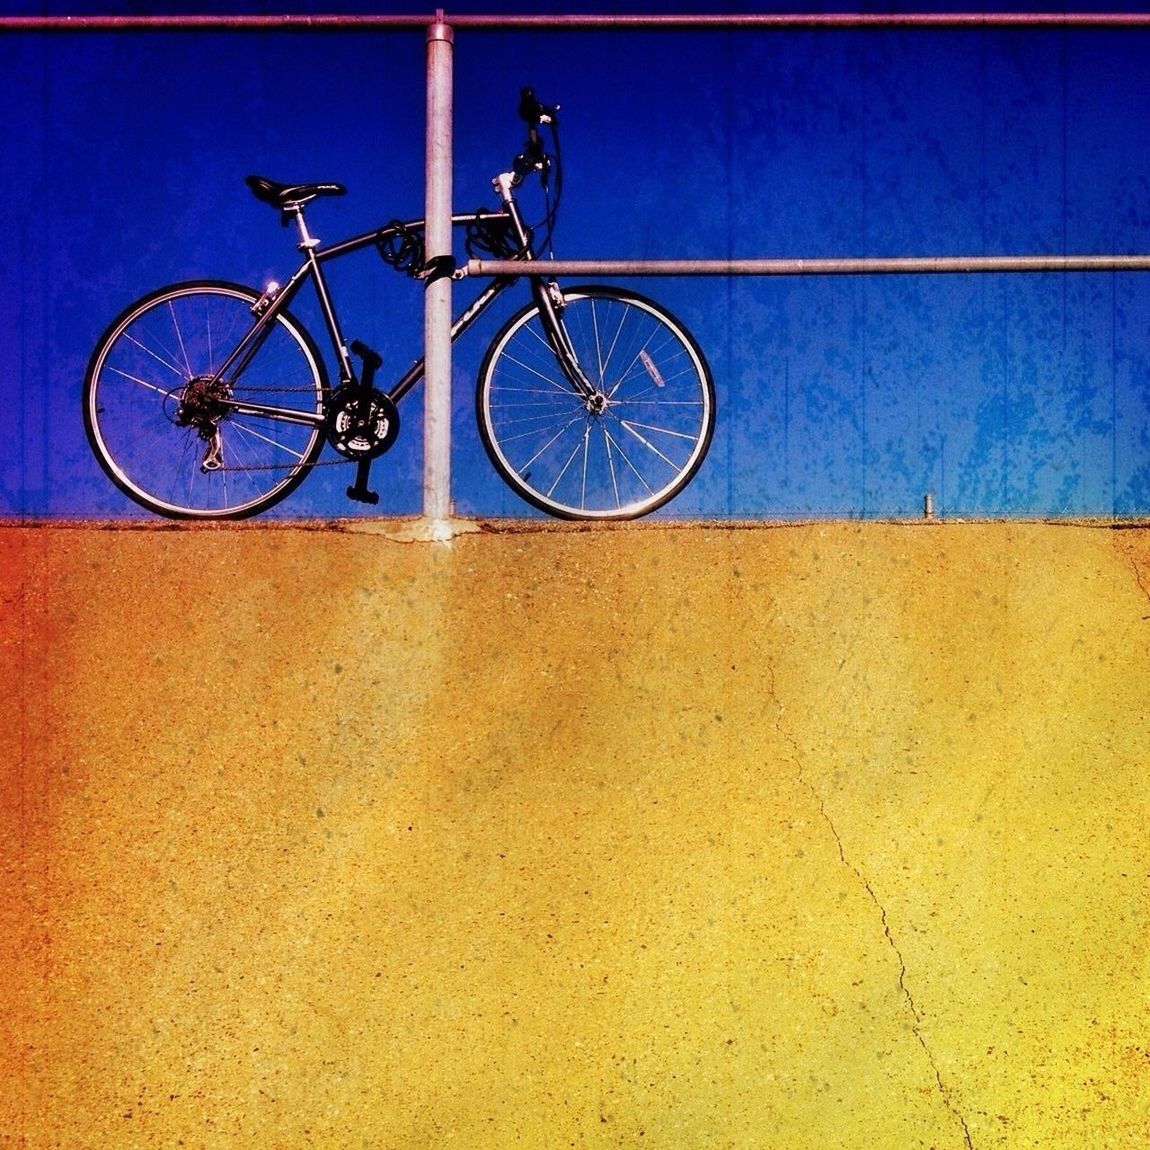 bicycle, transportation, mode of transport, land vehicle, blue, stationary, clear sky, wall - building feature, wheel, day, built structure, shadow, sunlight, low angle view, street, architecture, outdoors, parked, parking, copy space